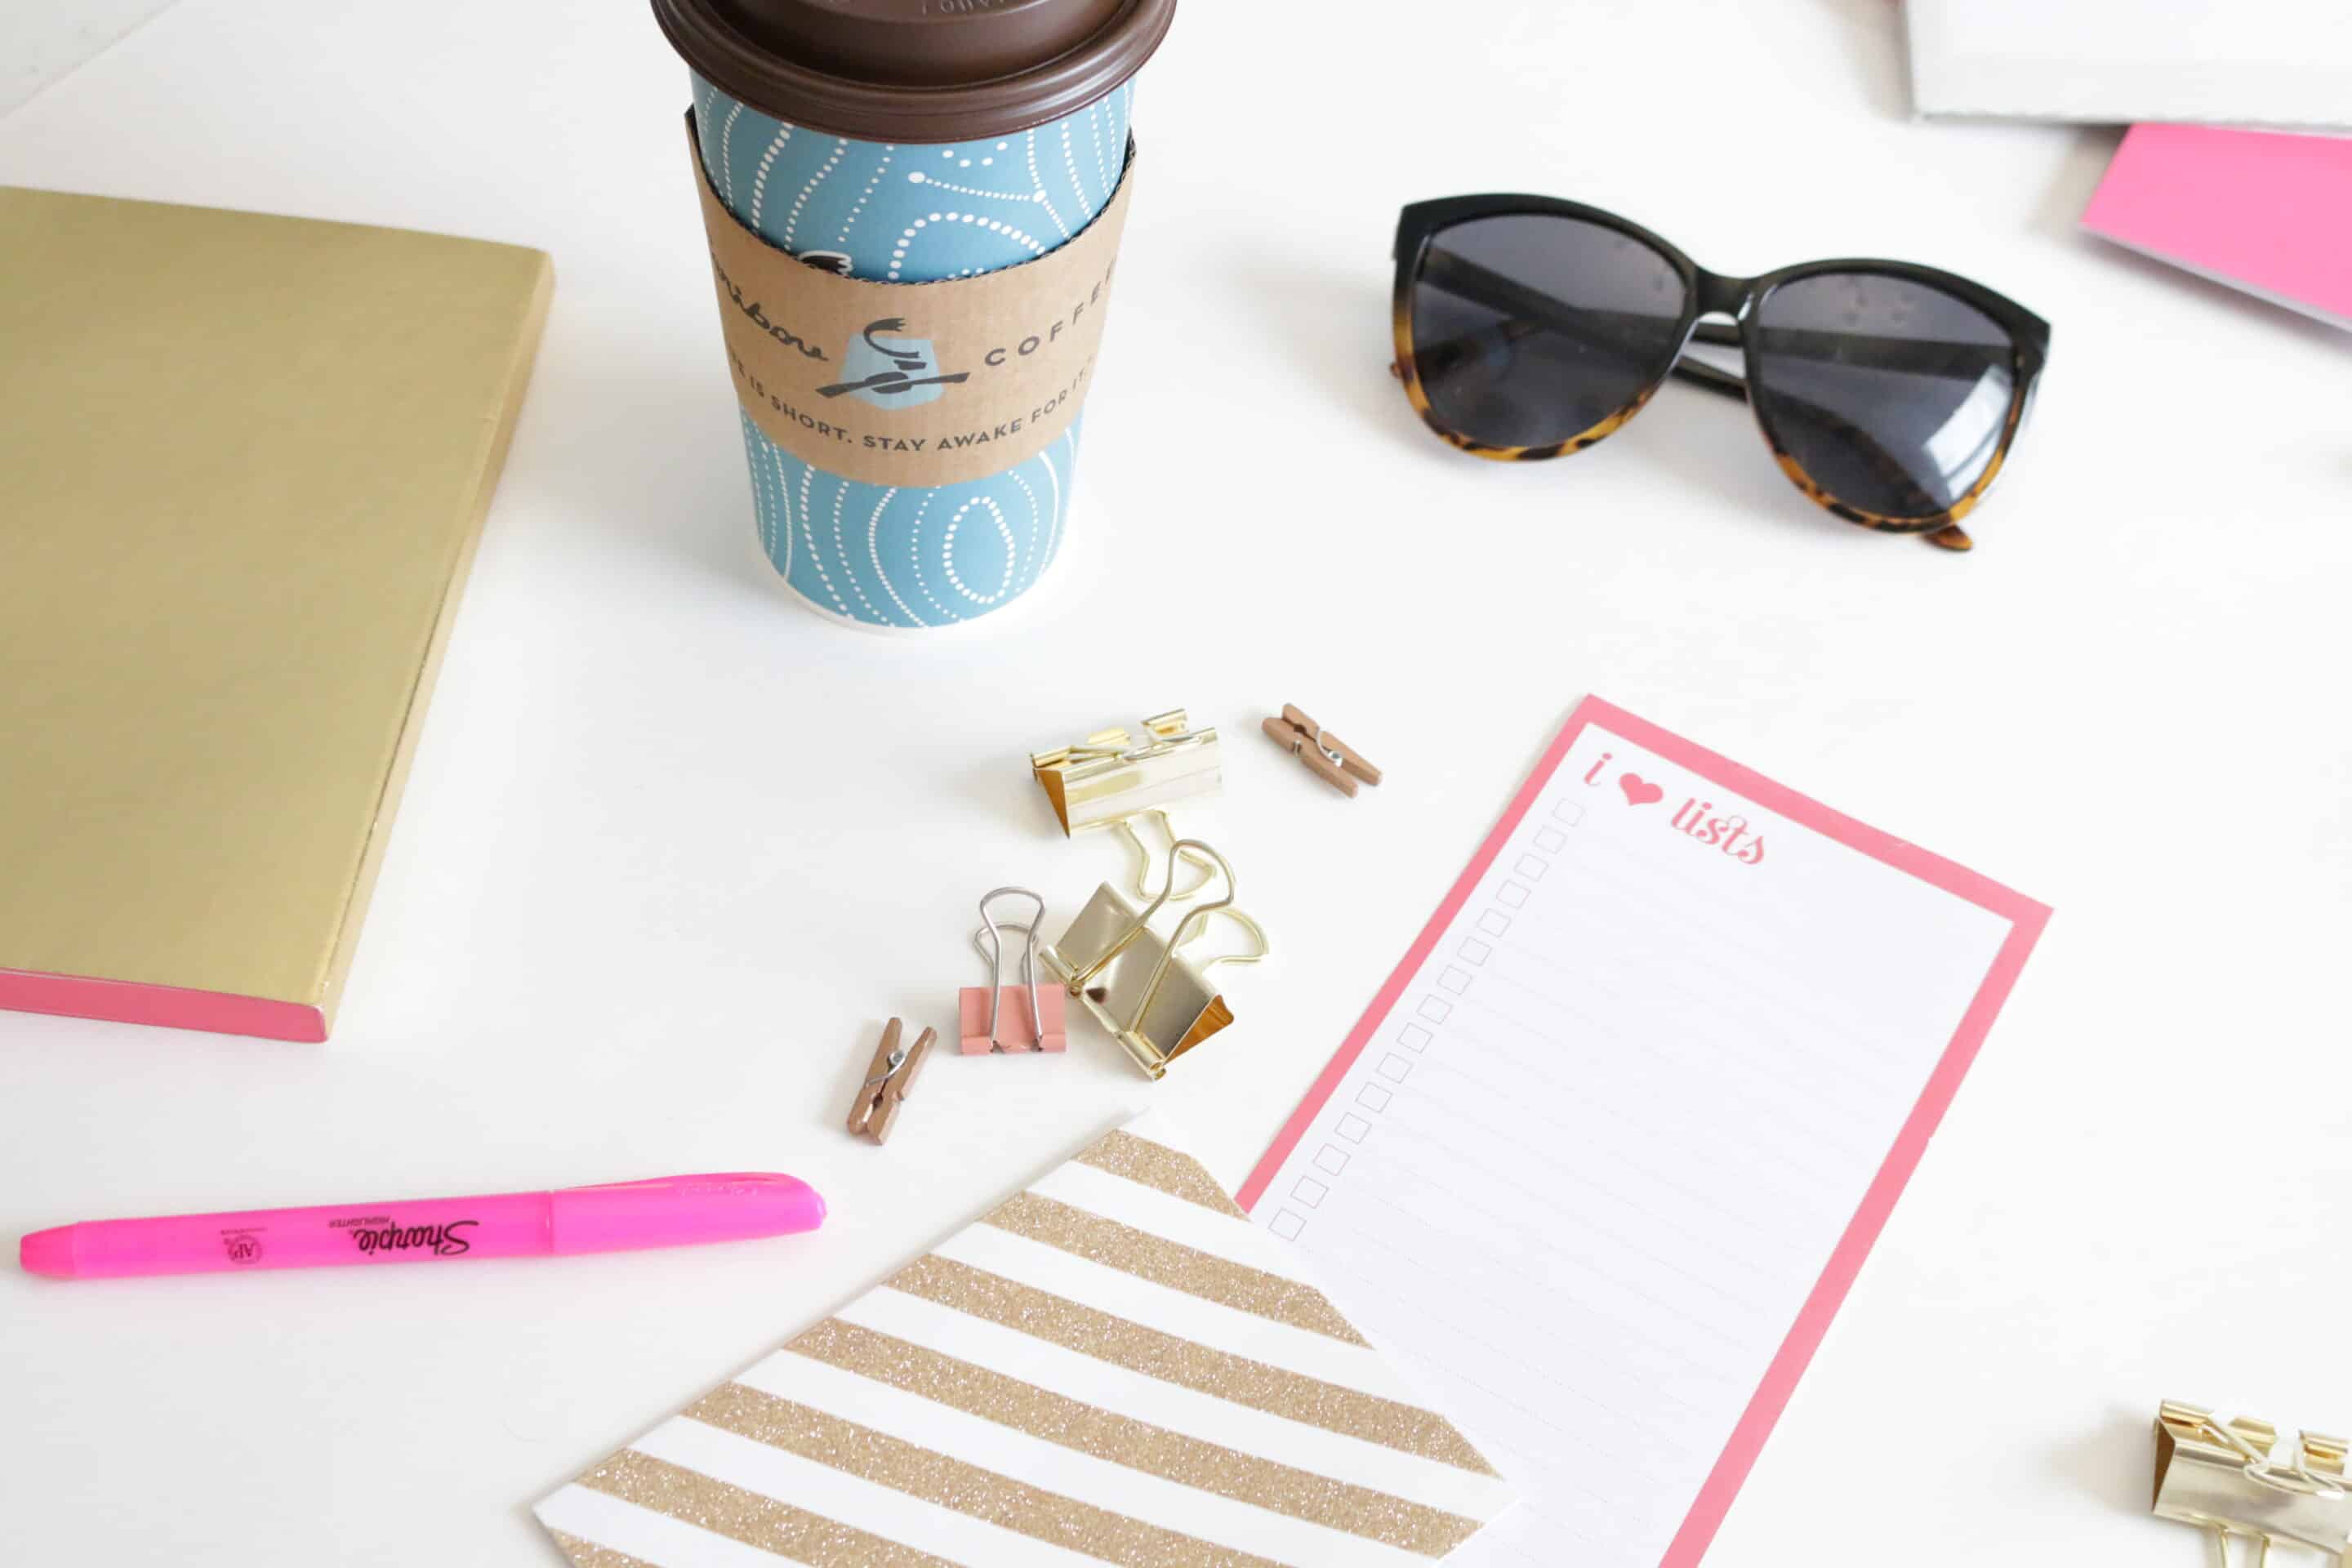 The Top 10 Processes You Need To Organize Your Life